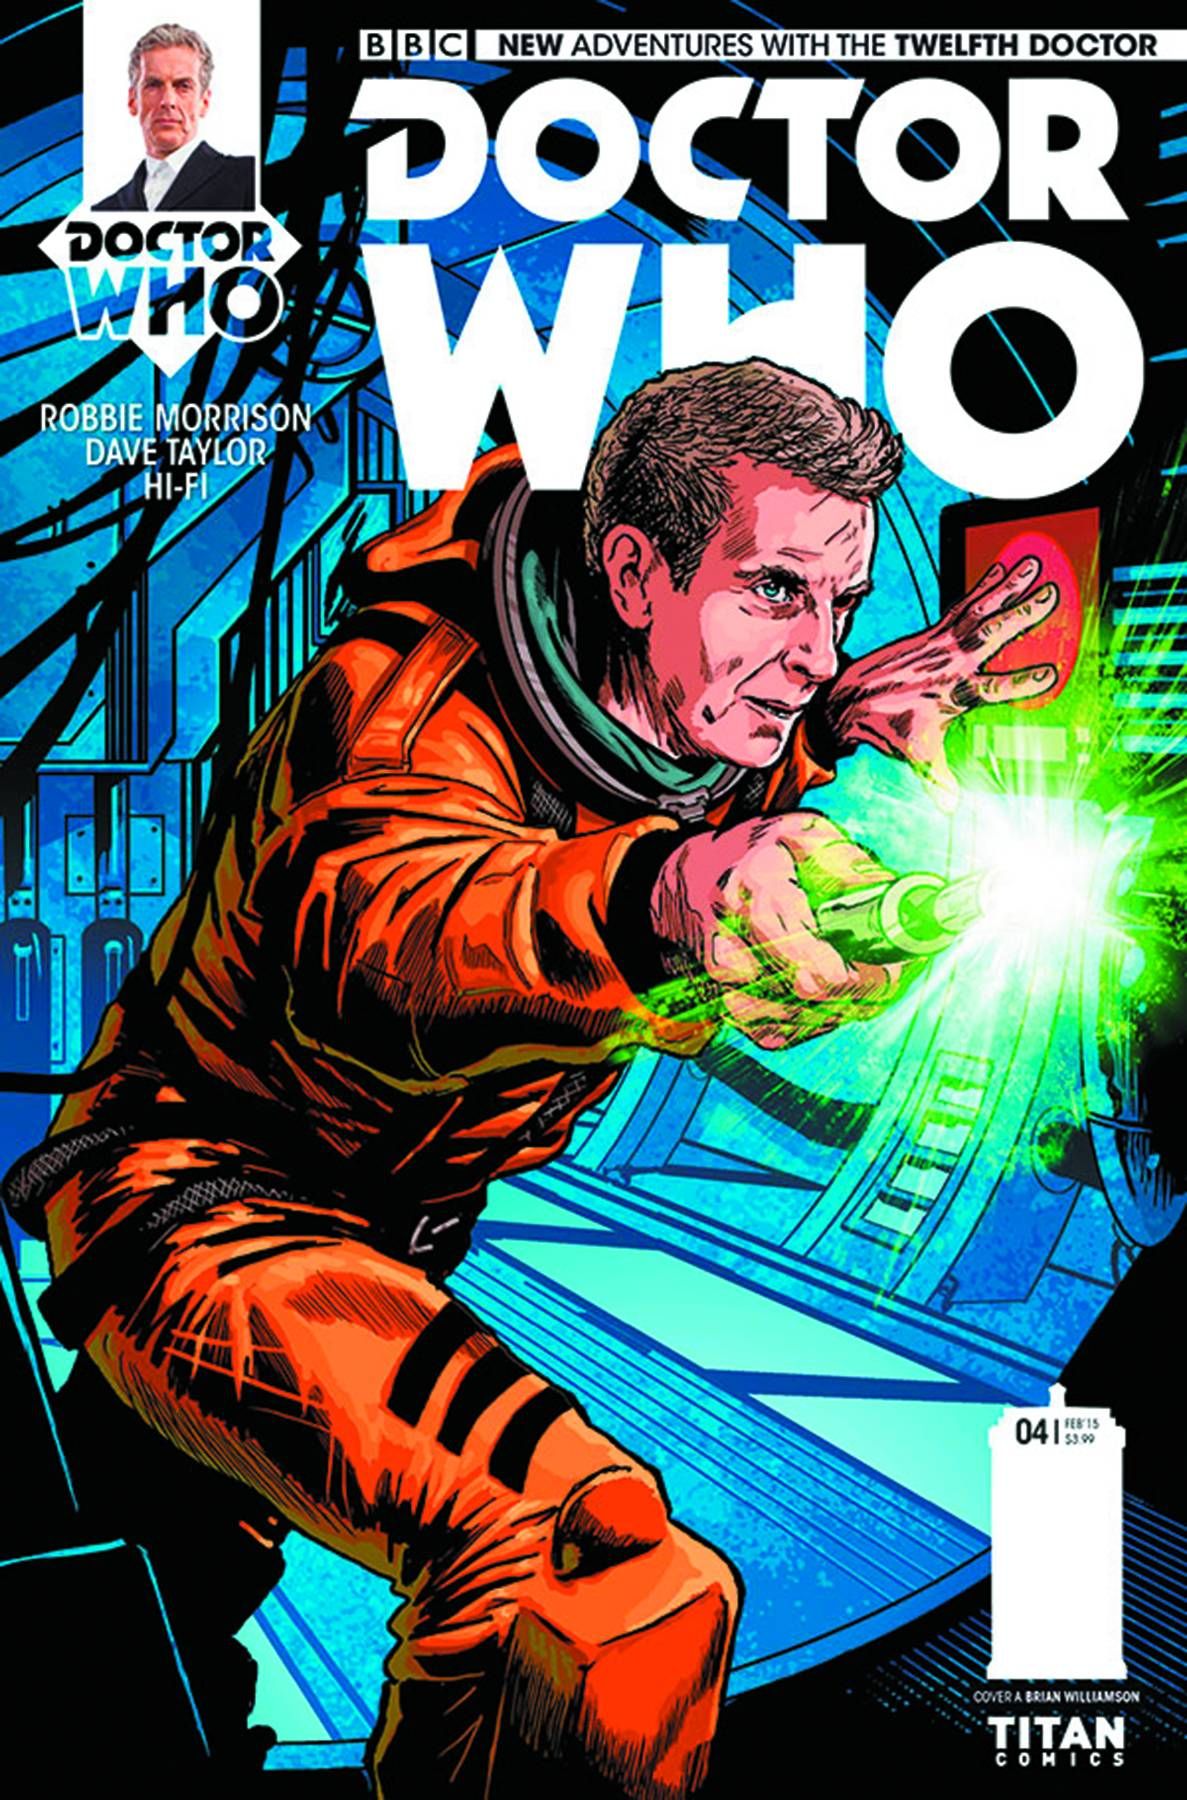 Doctor Who: The Twelfth Doctor #4 Comic